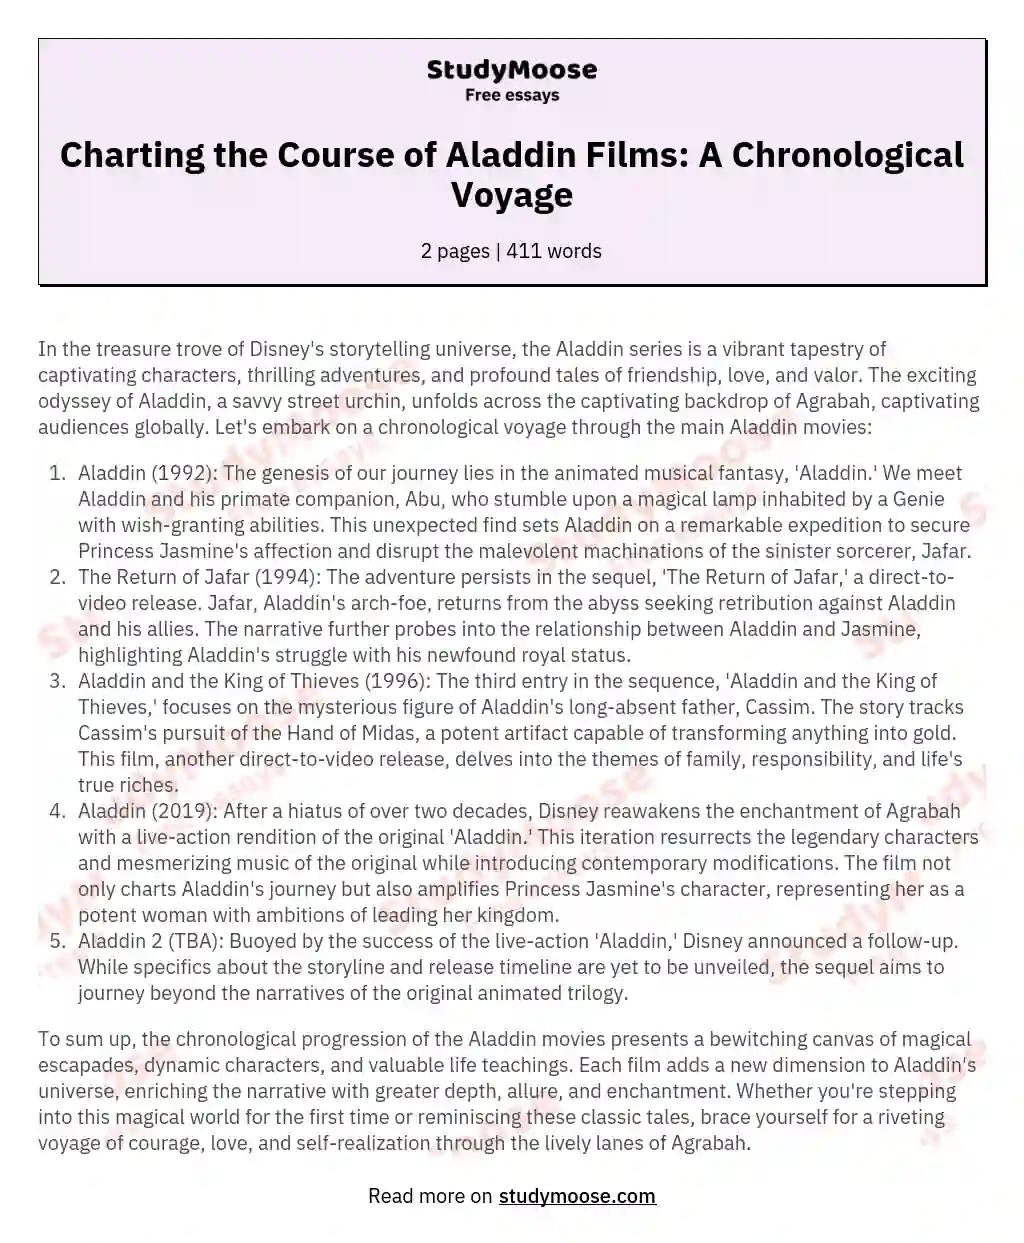 Charting the Course of Aladdin Films: A Chronological Voyage essay